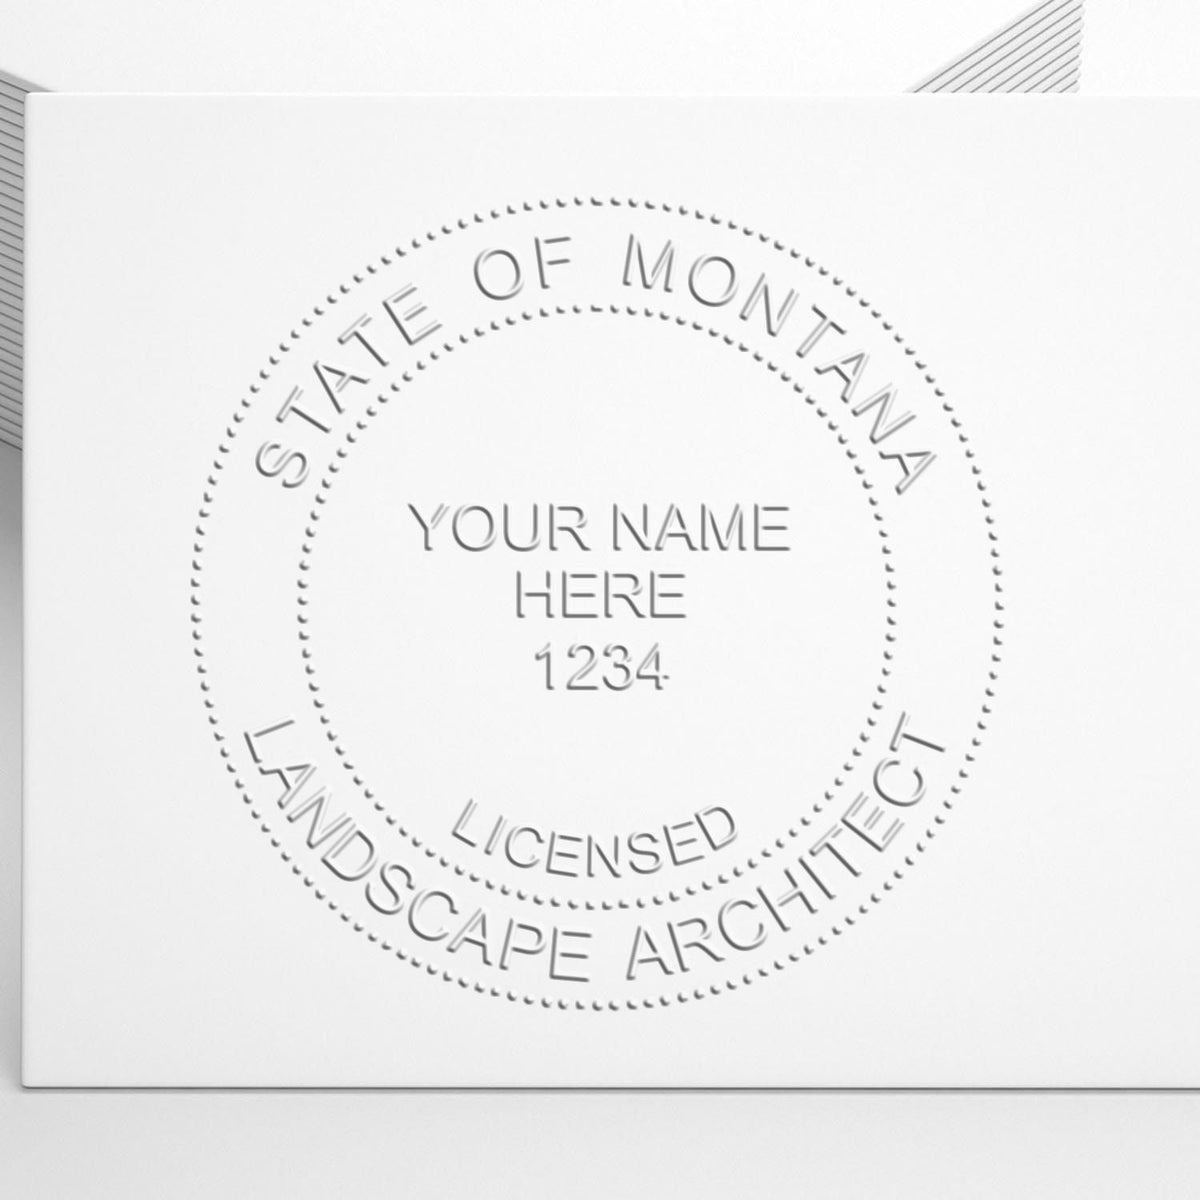 The Gift Montana Landscape Architect Seal stamp impression comes to life with a crisp, detailed image stamped on paper - showcasing true professional quality.